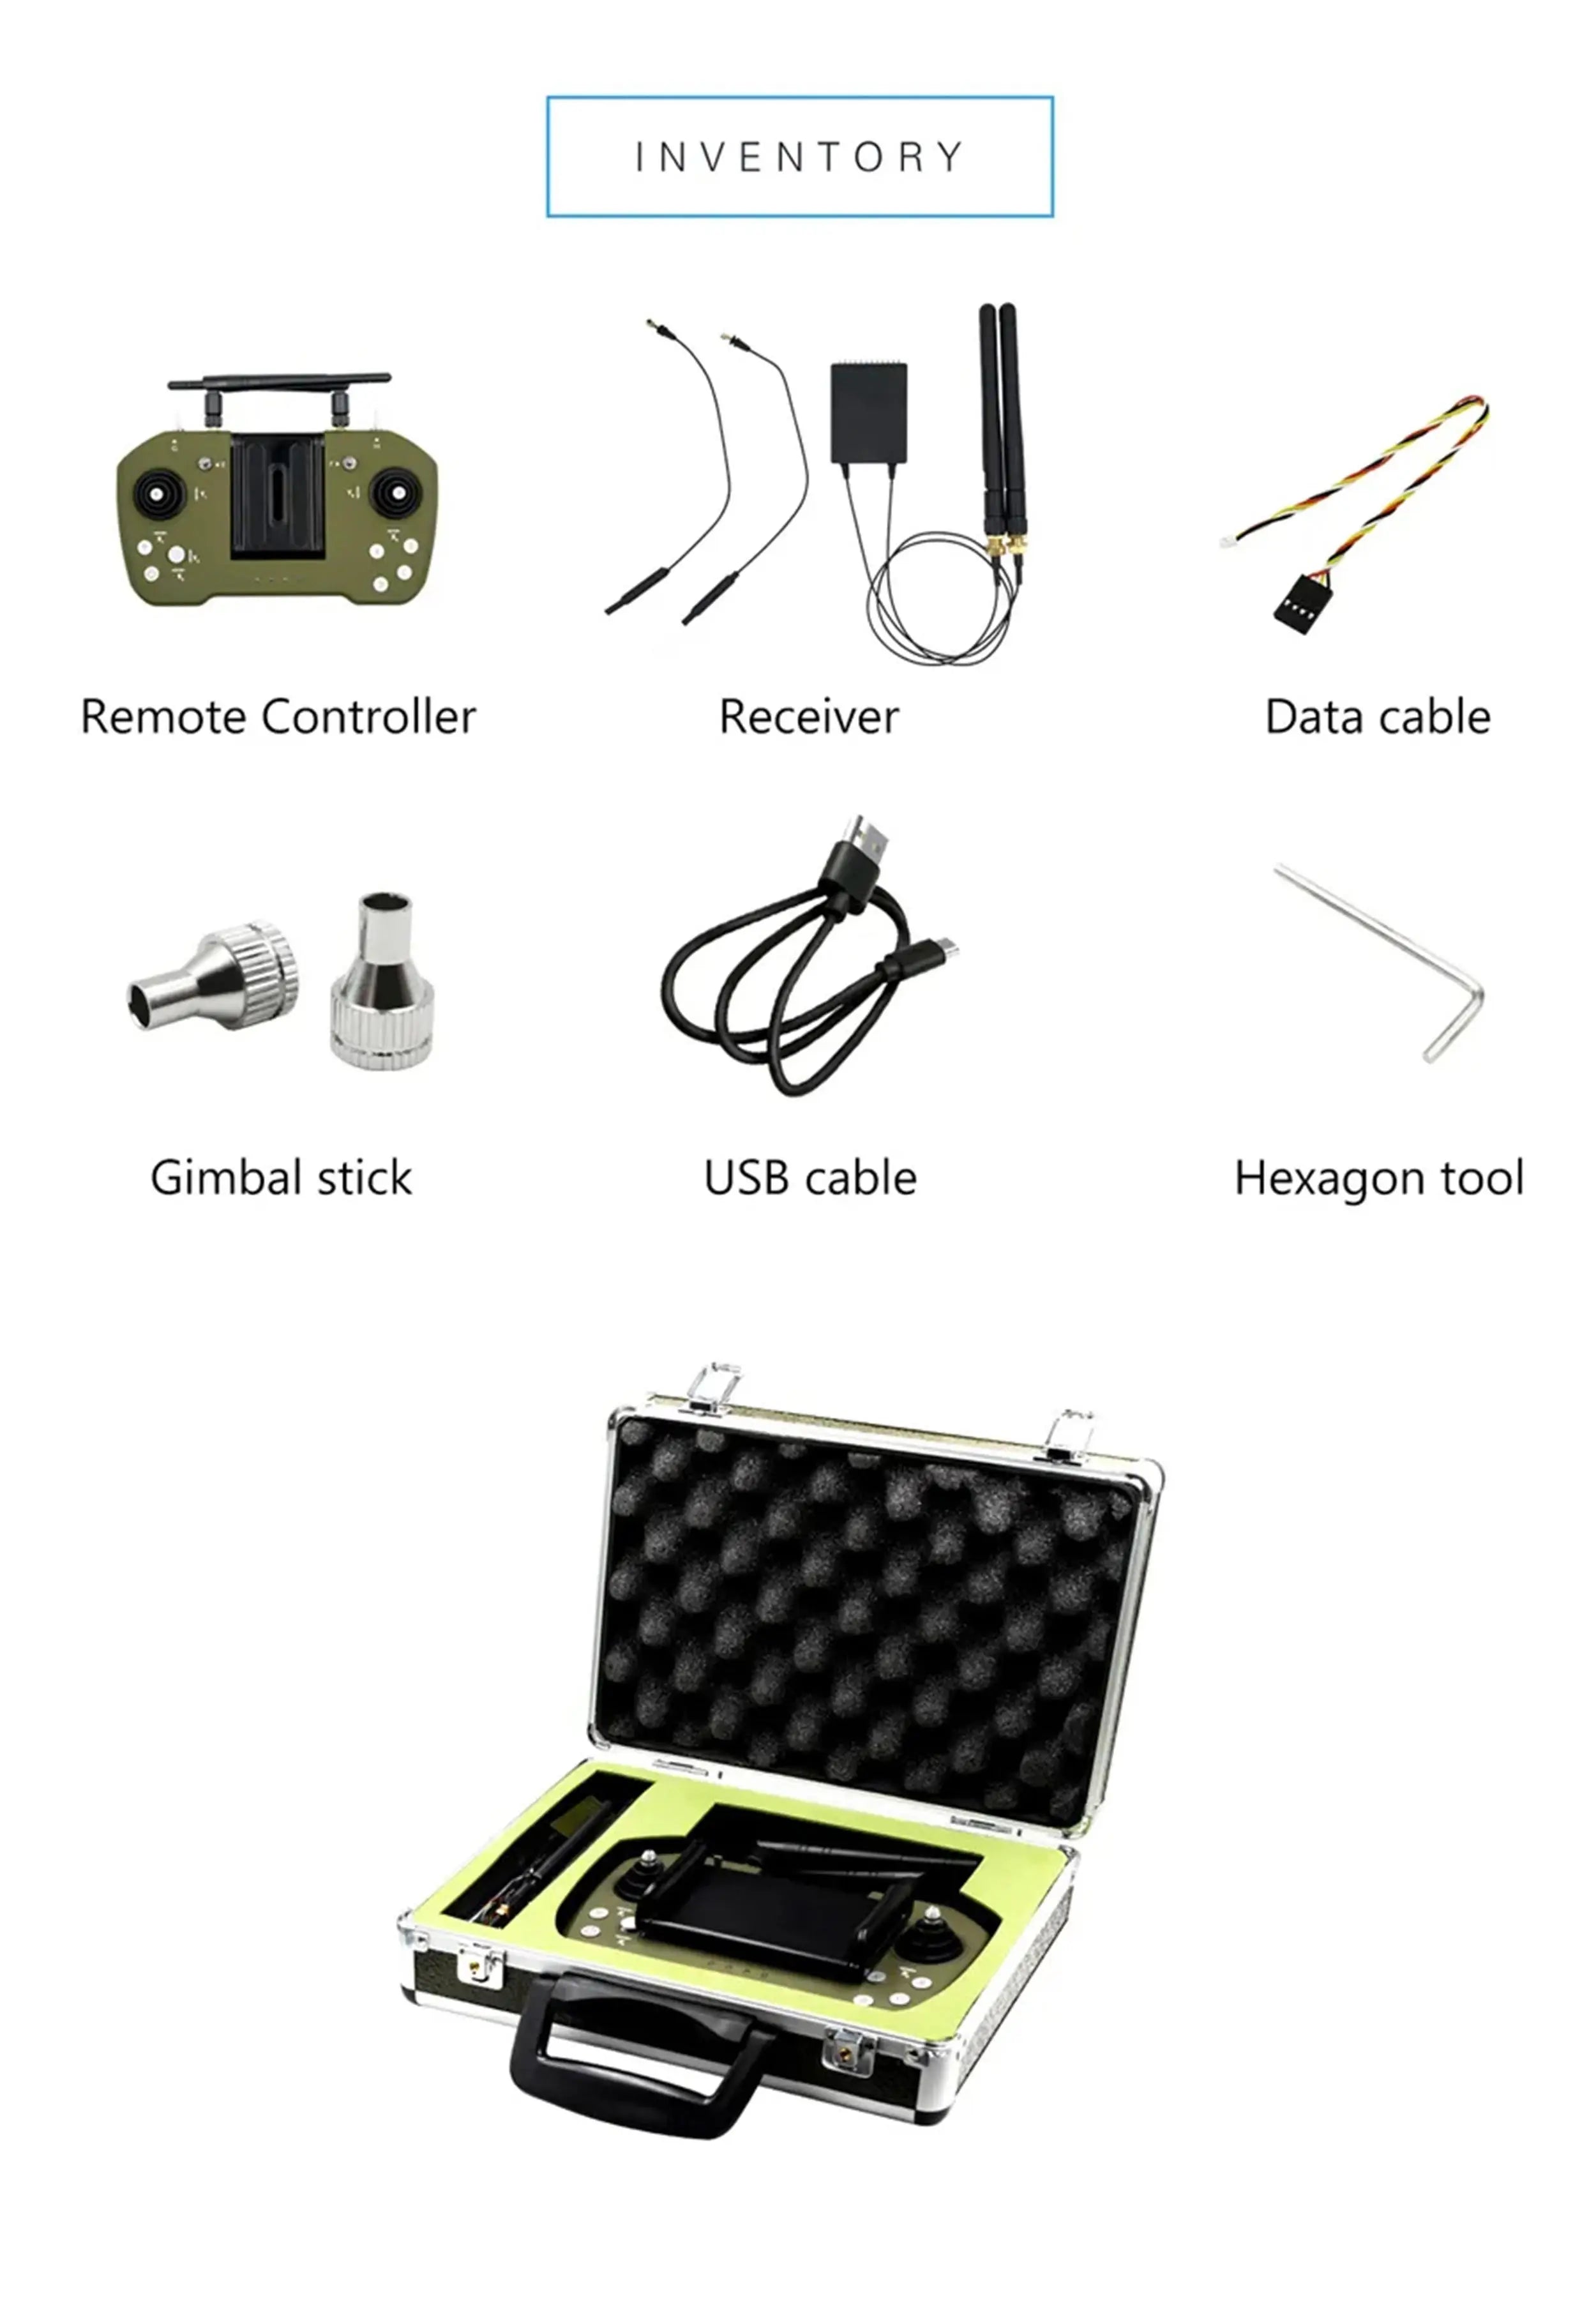 Kit contents: remote controller, receiver, cable, stick, and tool for Skydroid M12L drone radio system.